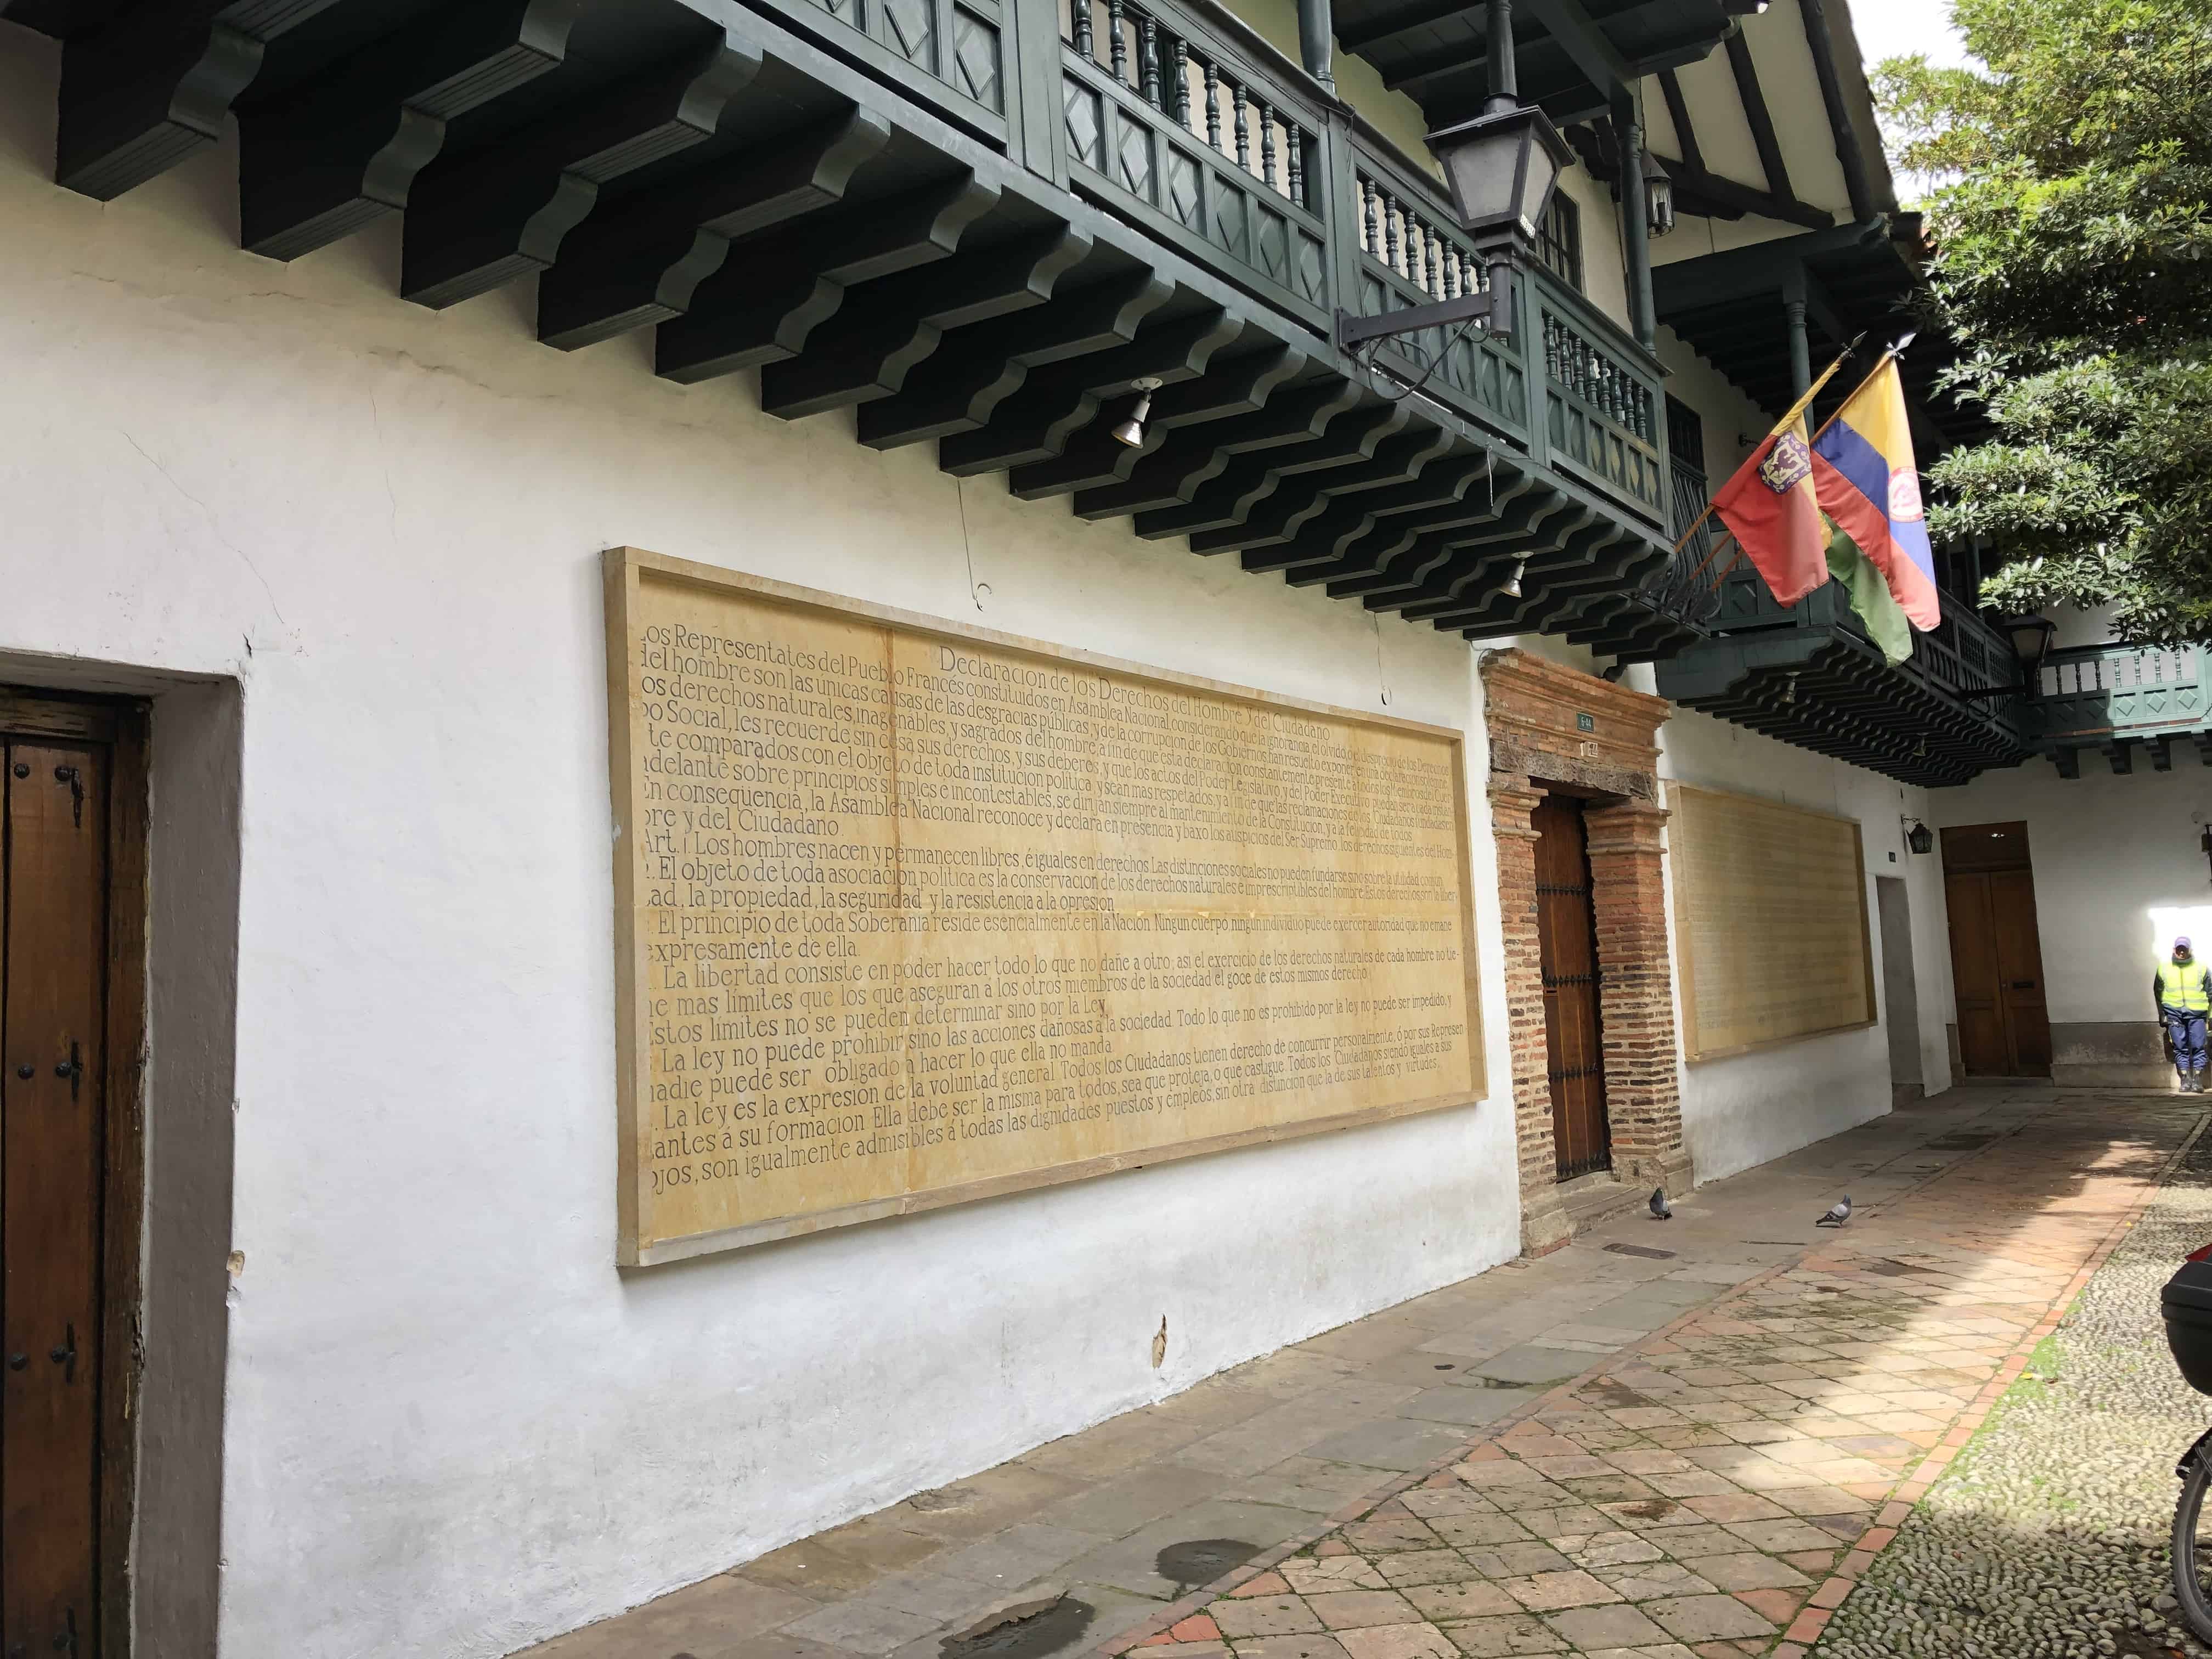 House of the Rights of Man in La Candelaria, Bogotá, Colombia